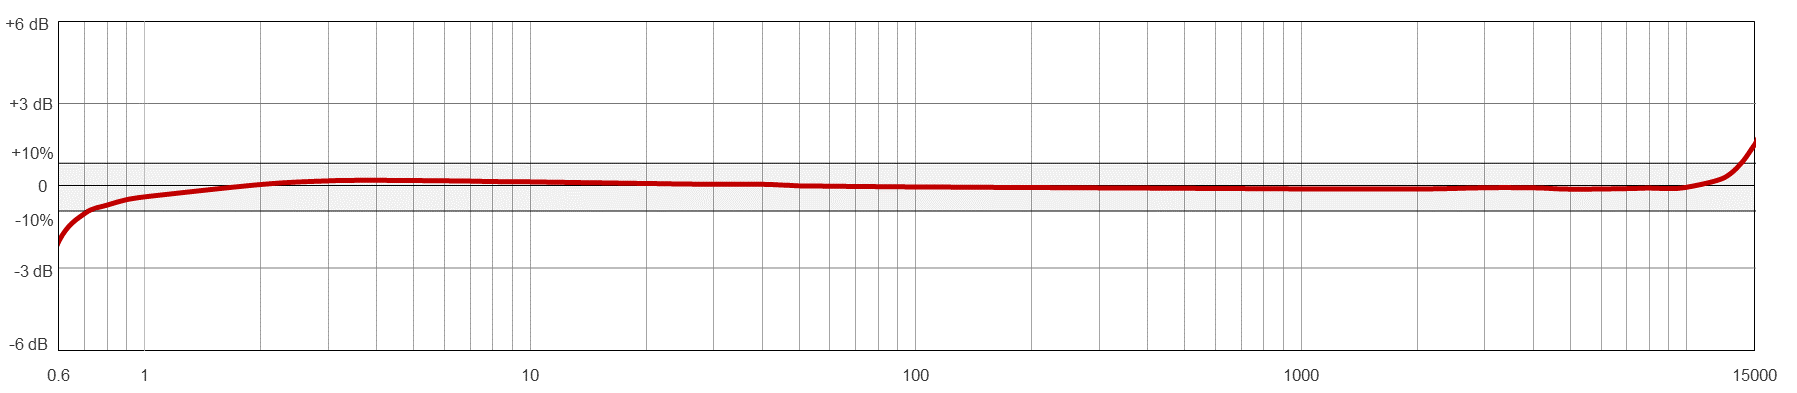 A line graph showing the frequency resopnse of a CTC AC246 condition monitoring sensor.